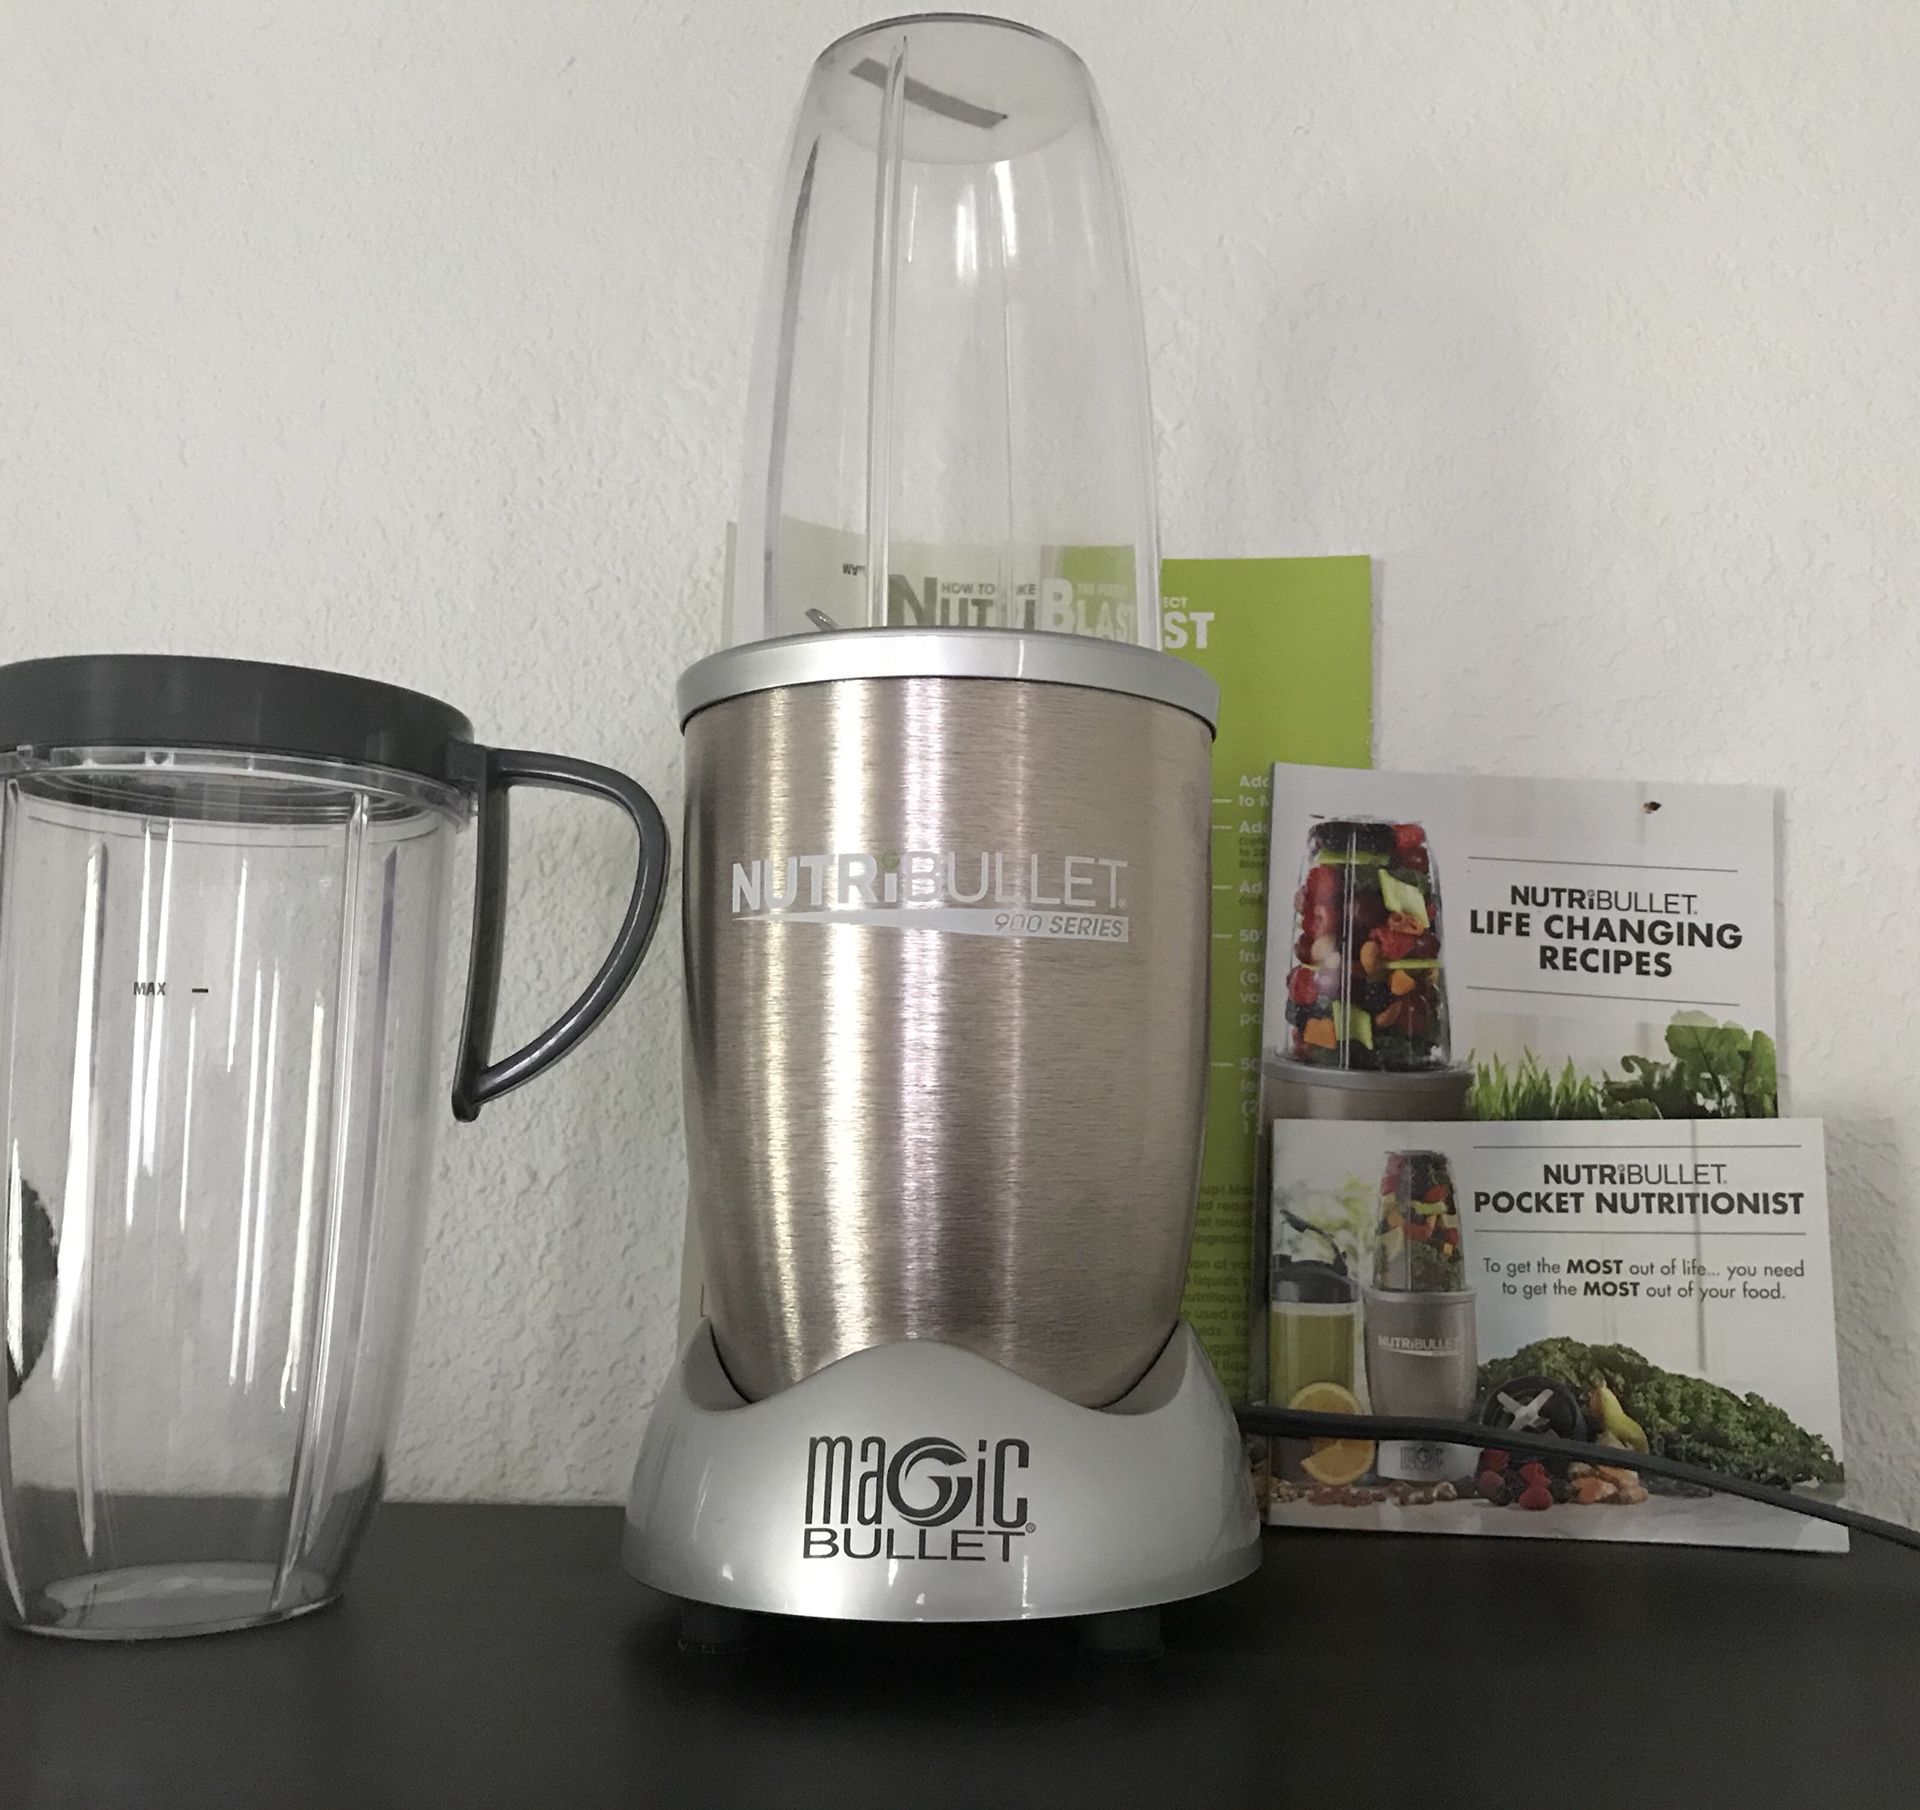 Used Baby Bullet Food Blender for Sale in Wappingers Fl, NY - OfferUp